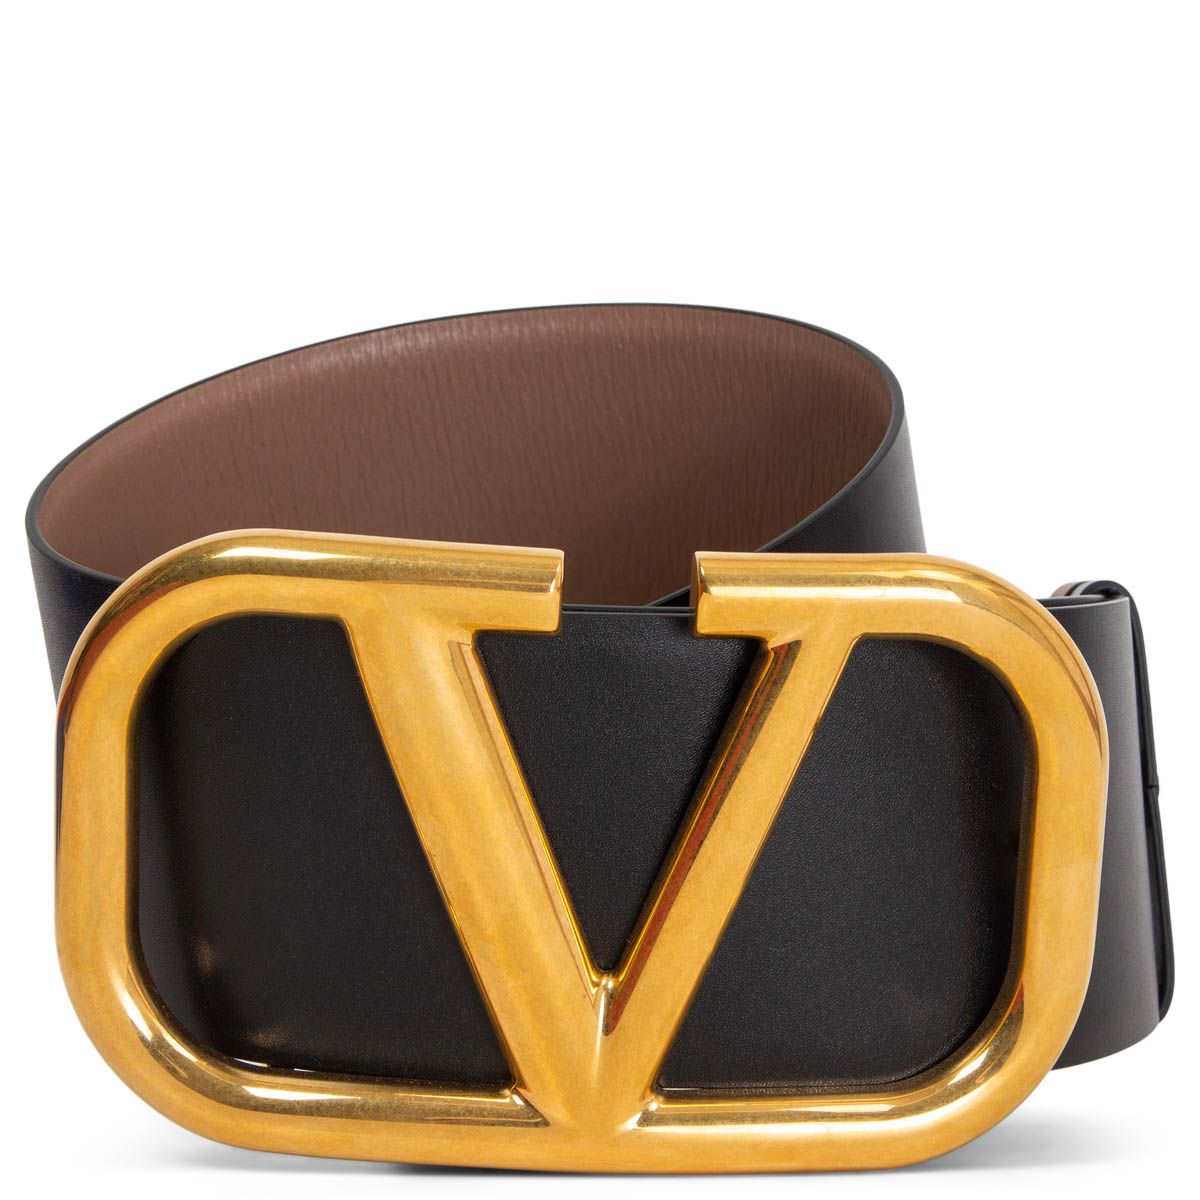 Valentino Garavani - Authenticated Belt - Leather Black Plain for Men, Never Worn, with Tag